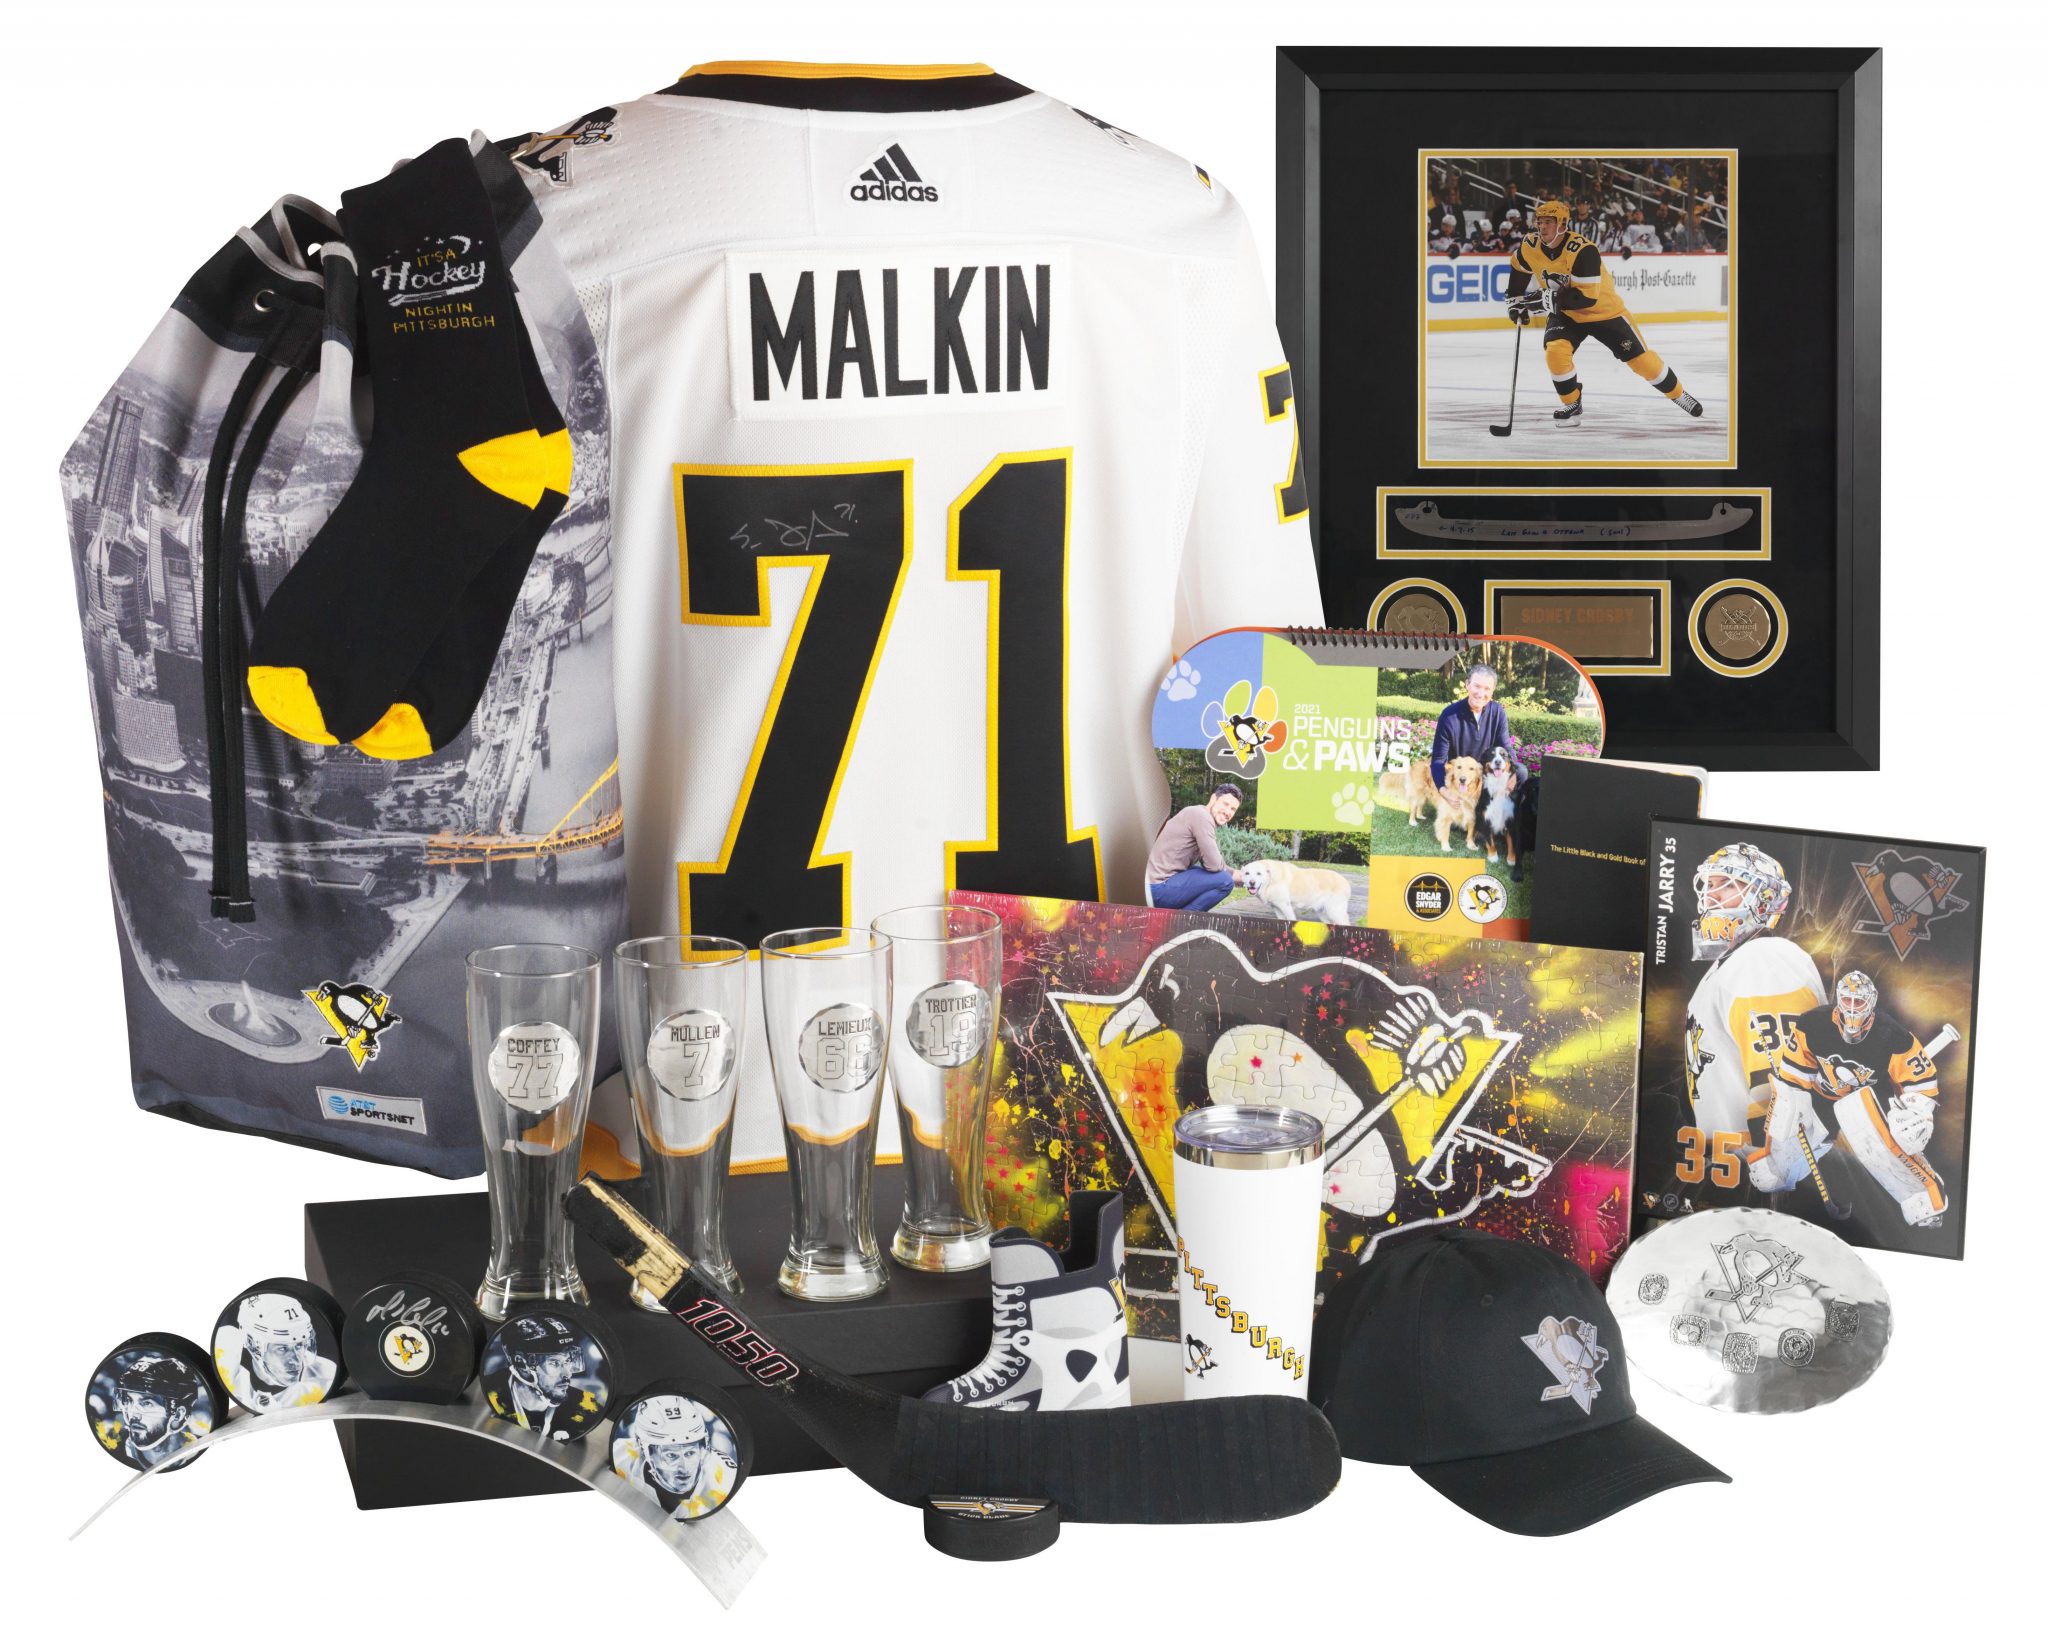 Pittsburgh Penguins Merchandise & Gifts - SportsUnlimited.com